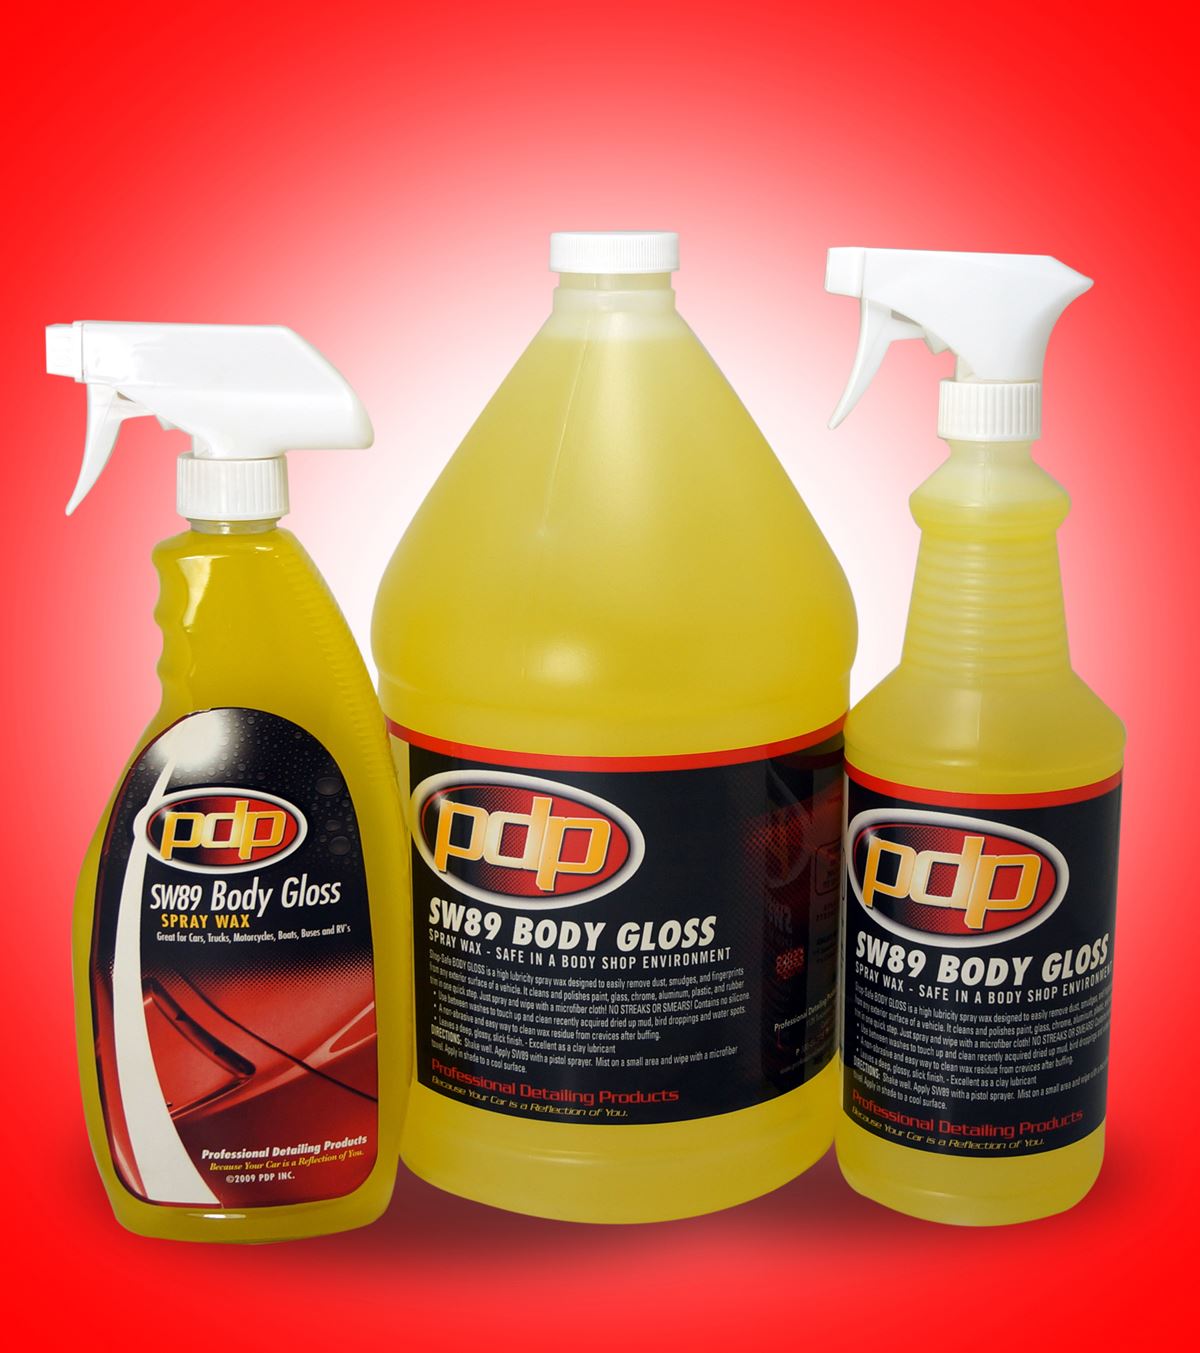 BODY GLOSS. Professional Detailing Products, Because Your Car is a